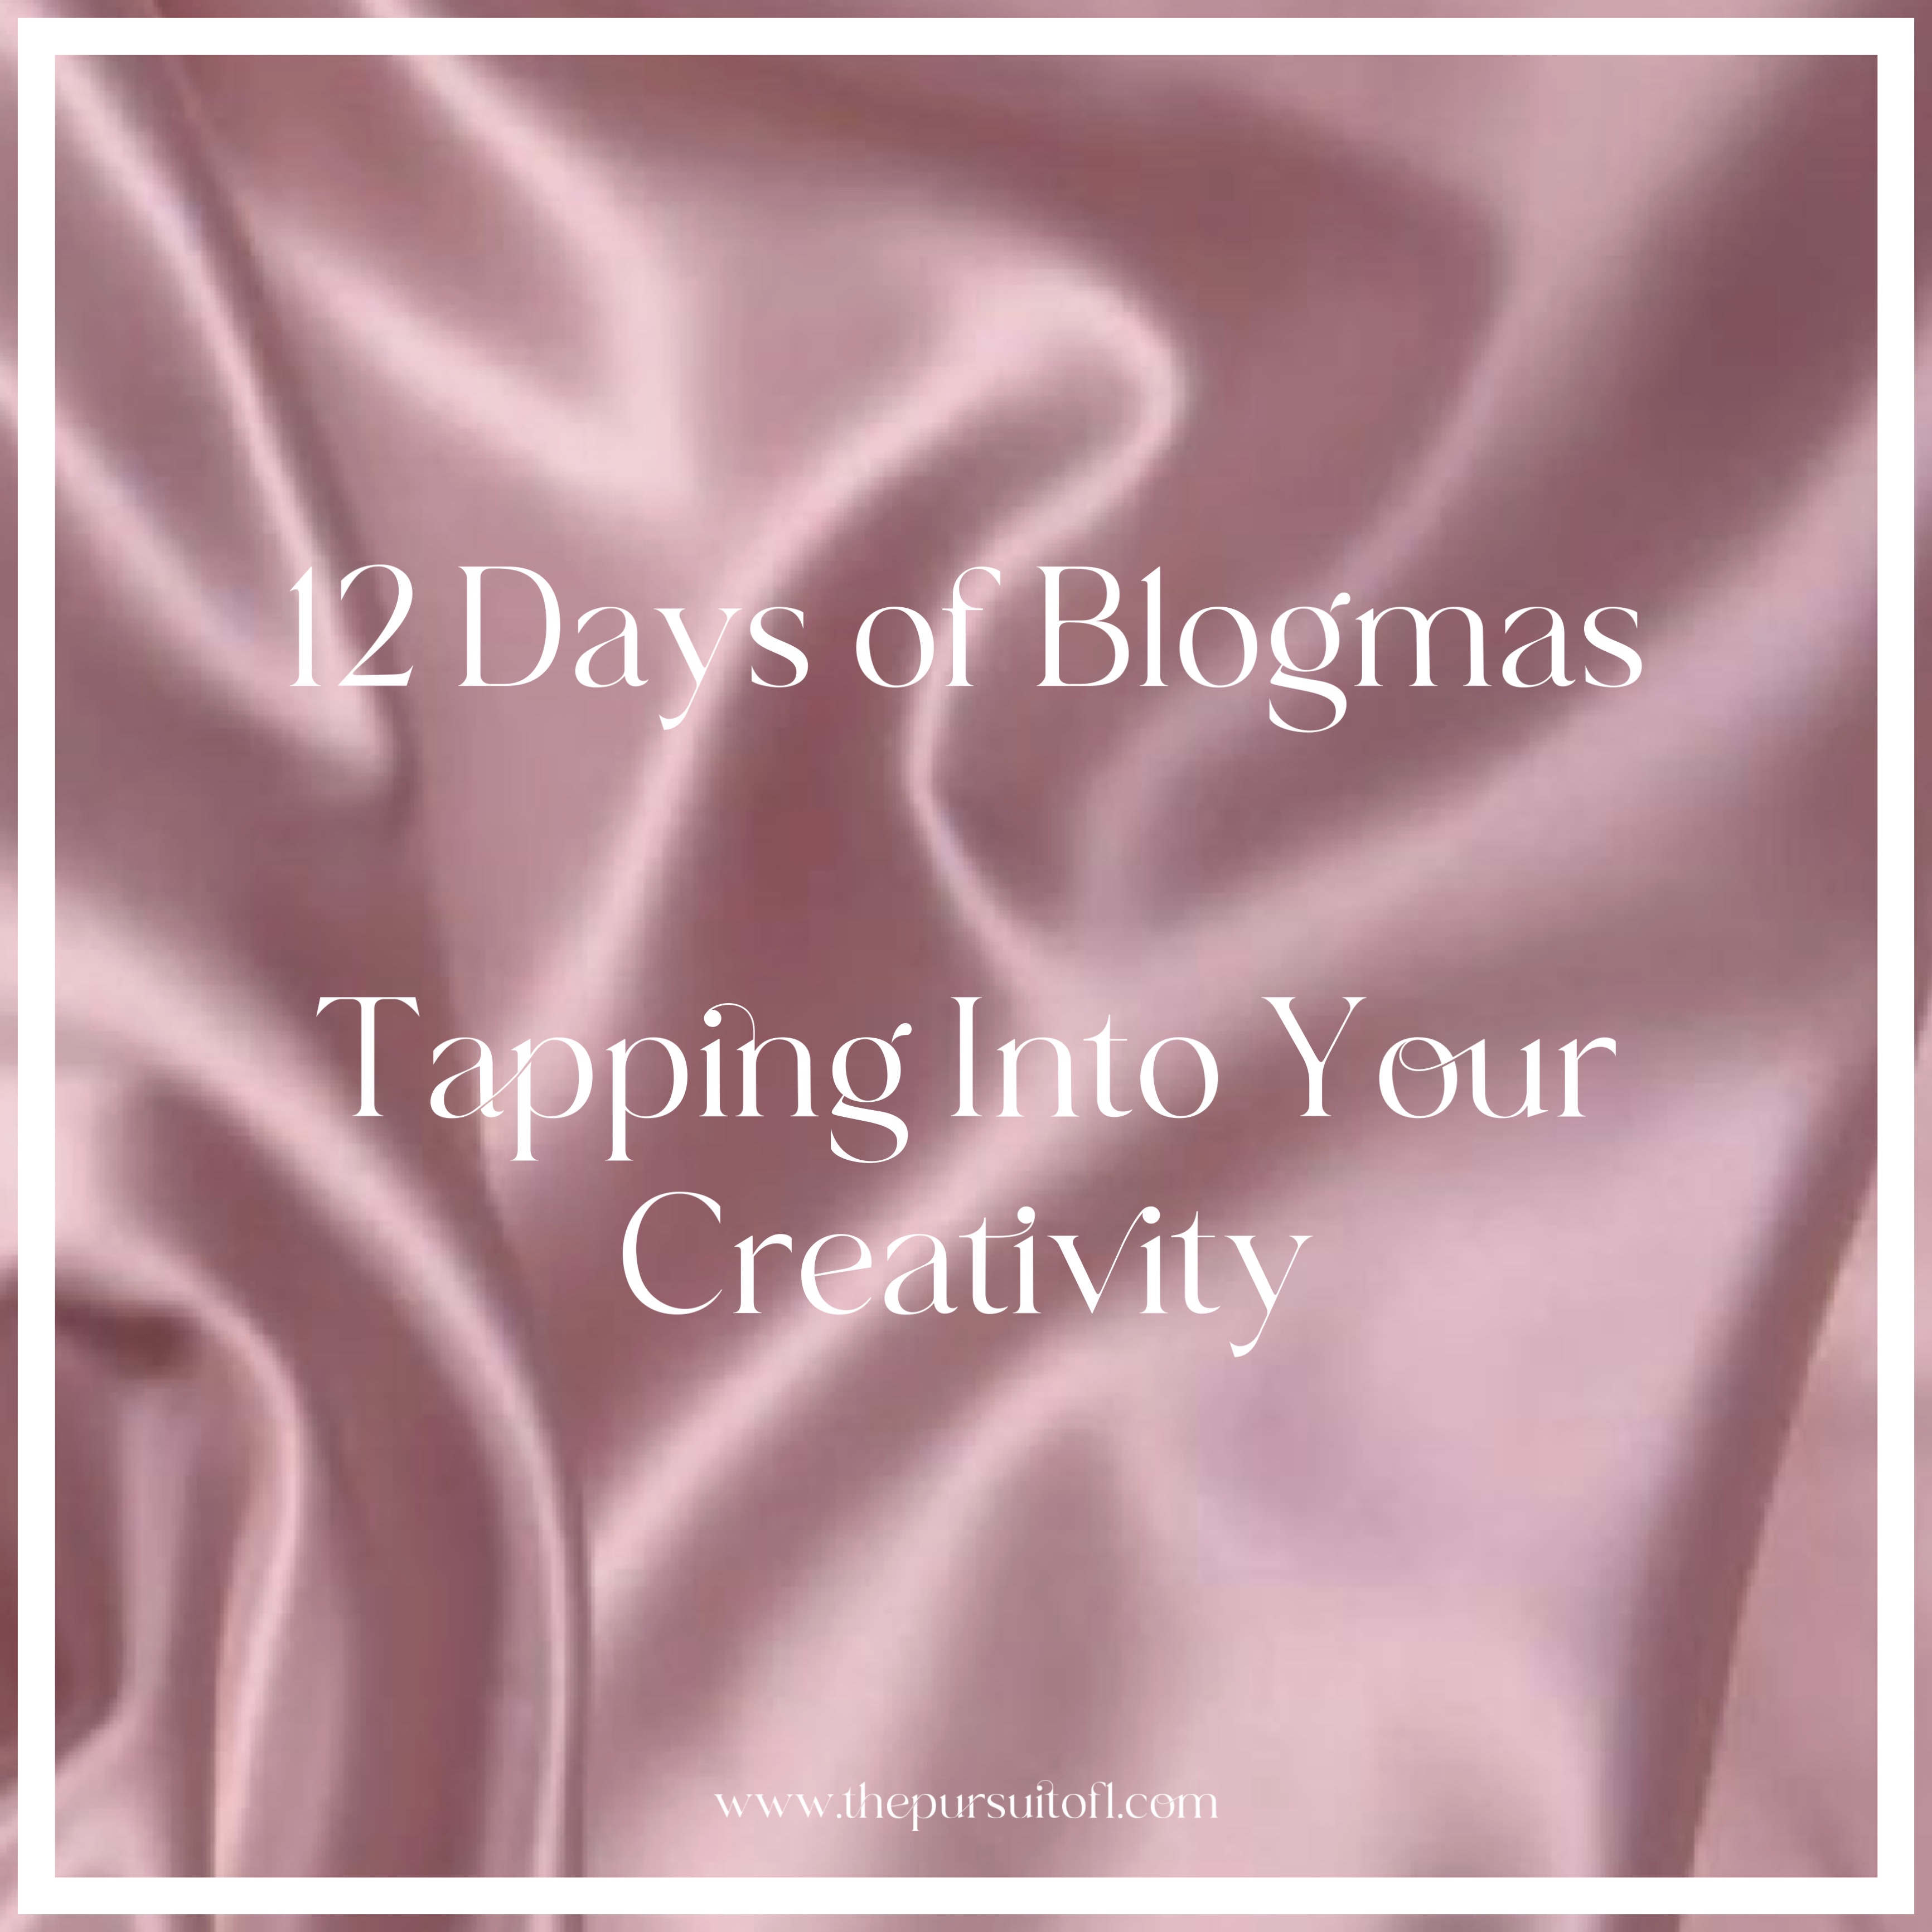 12 Days of Blogmas, Tapping Into Your Creativity